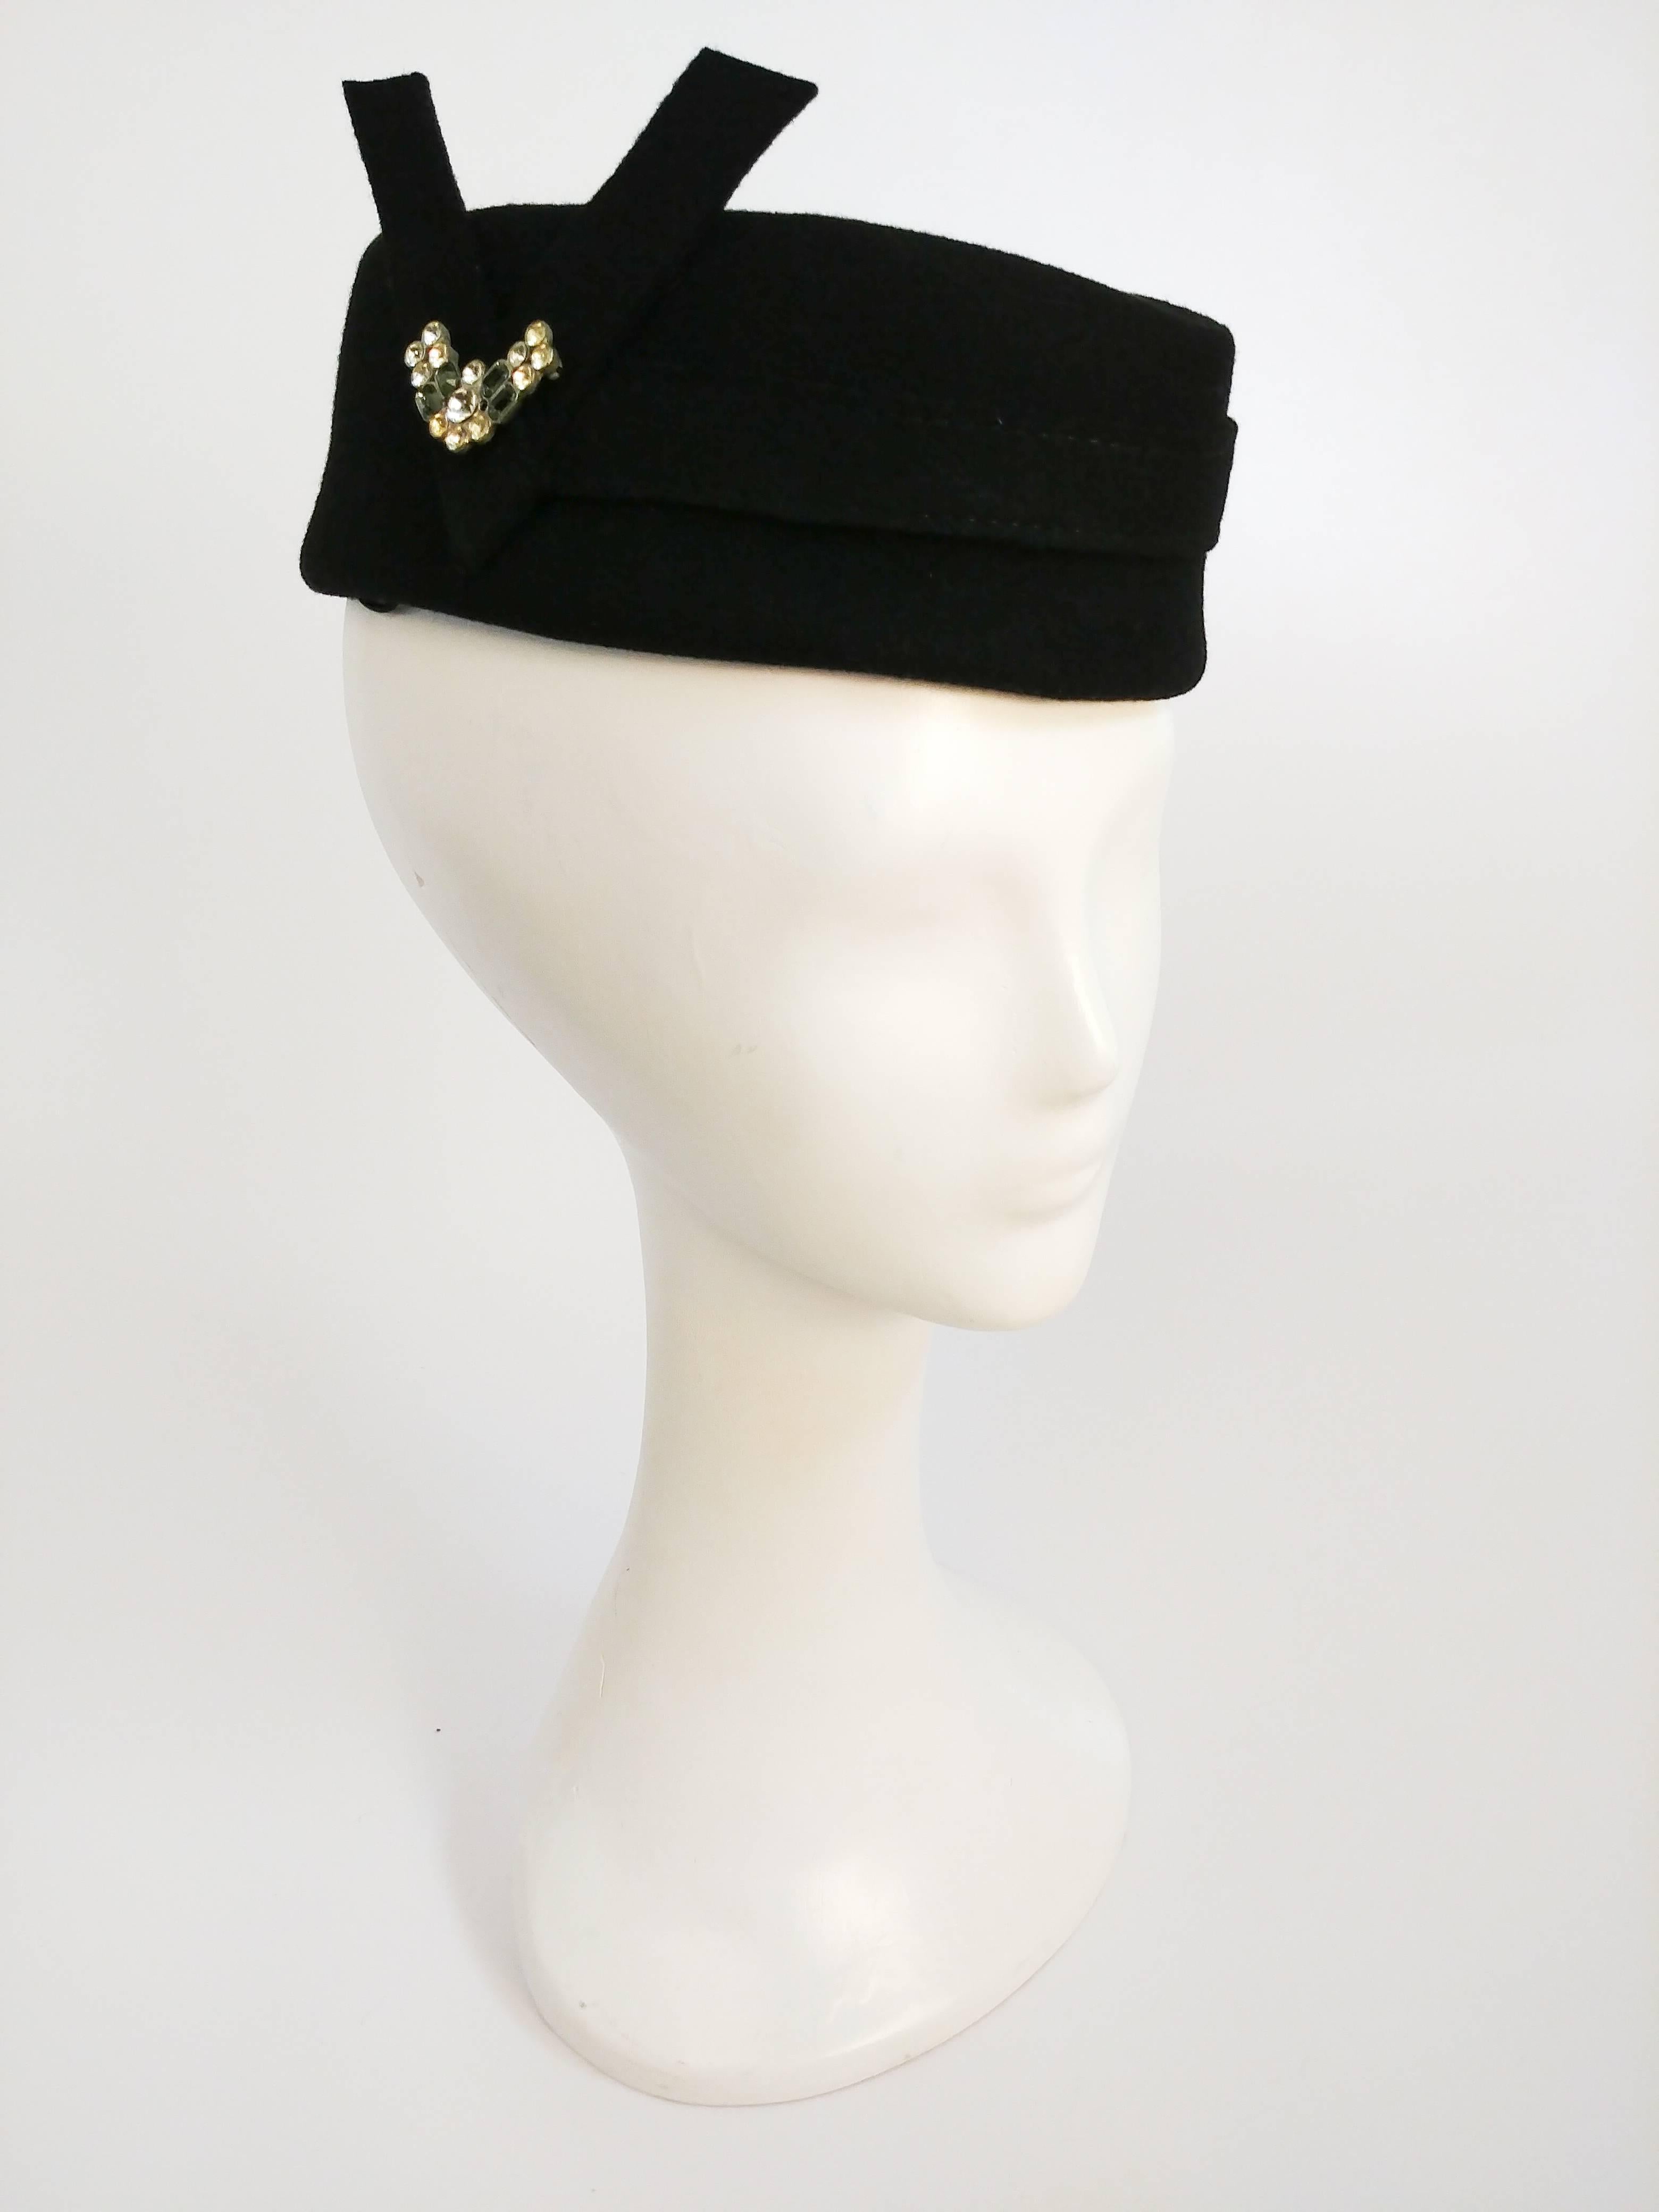 1940s V for Victory Army Style Women's Hat. Patriotic V for Victory WWII cap embellished with rhinestones. Elastic band holds hat to back of head. 